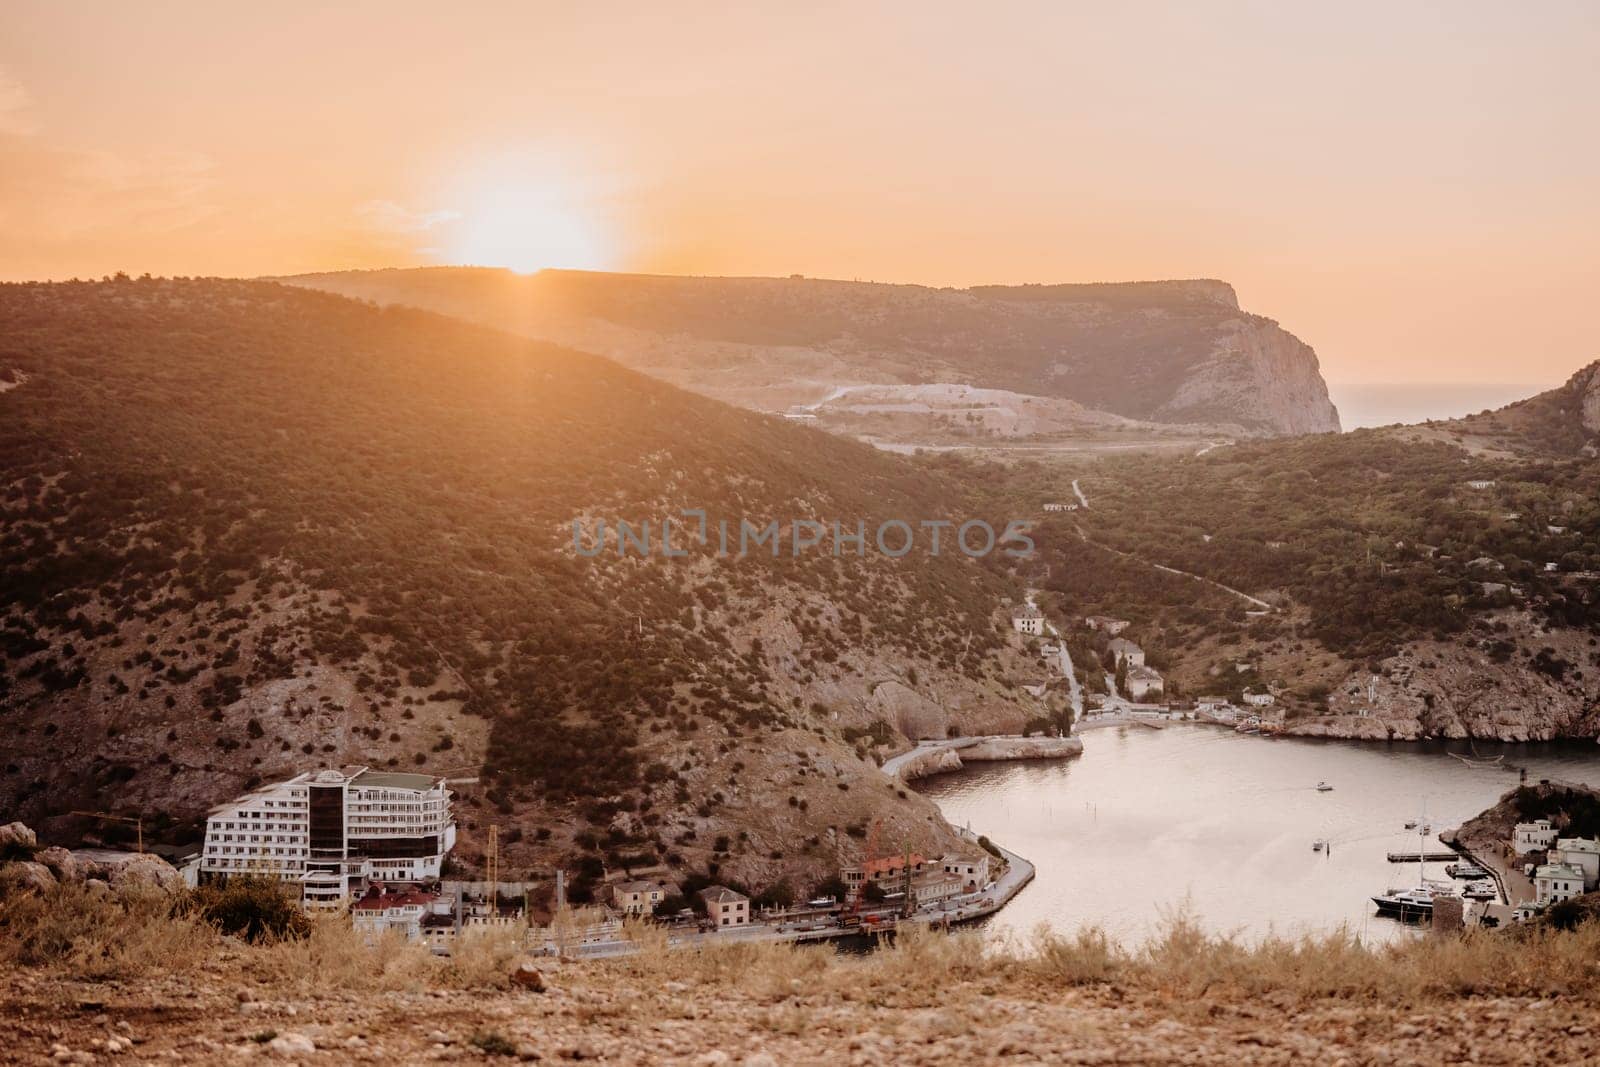 A beautiful sunset over a mountain with a small town in the distance. The sun is setting behind the mountains, casting a warm glow over the landscape. The water in the valley is calm and peaceful